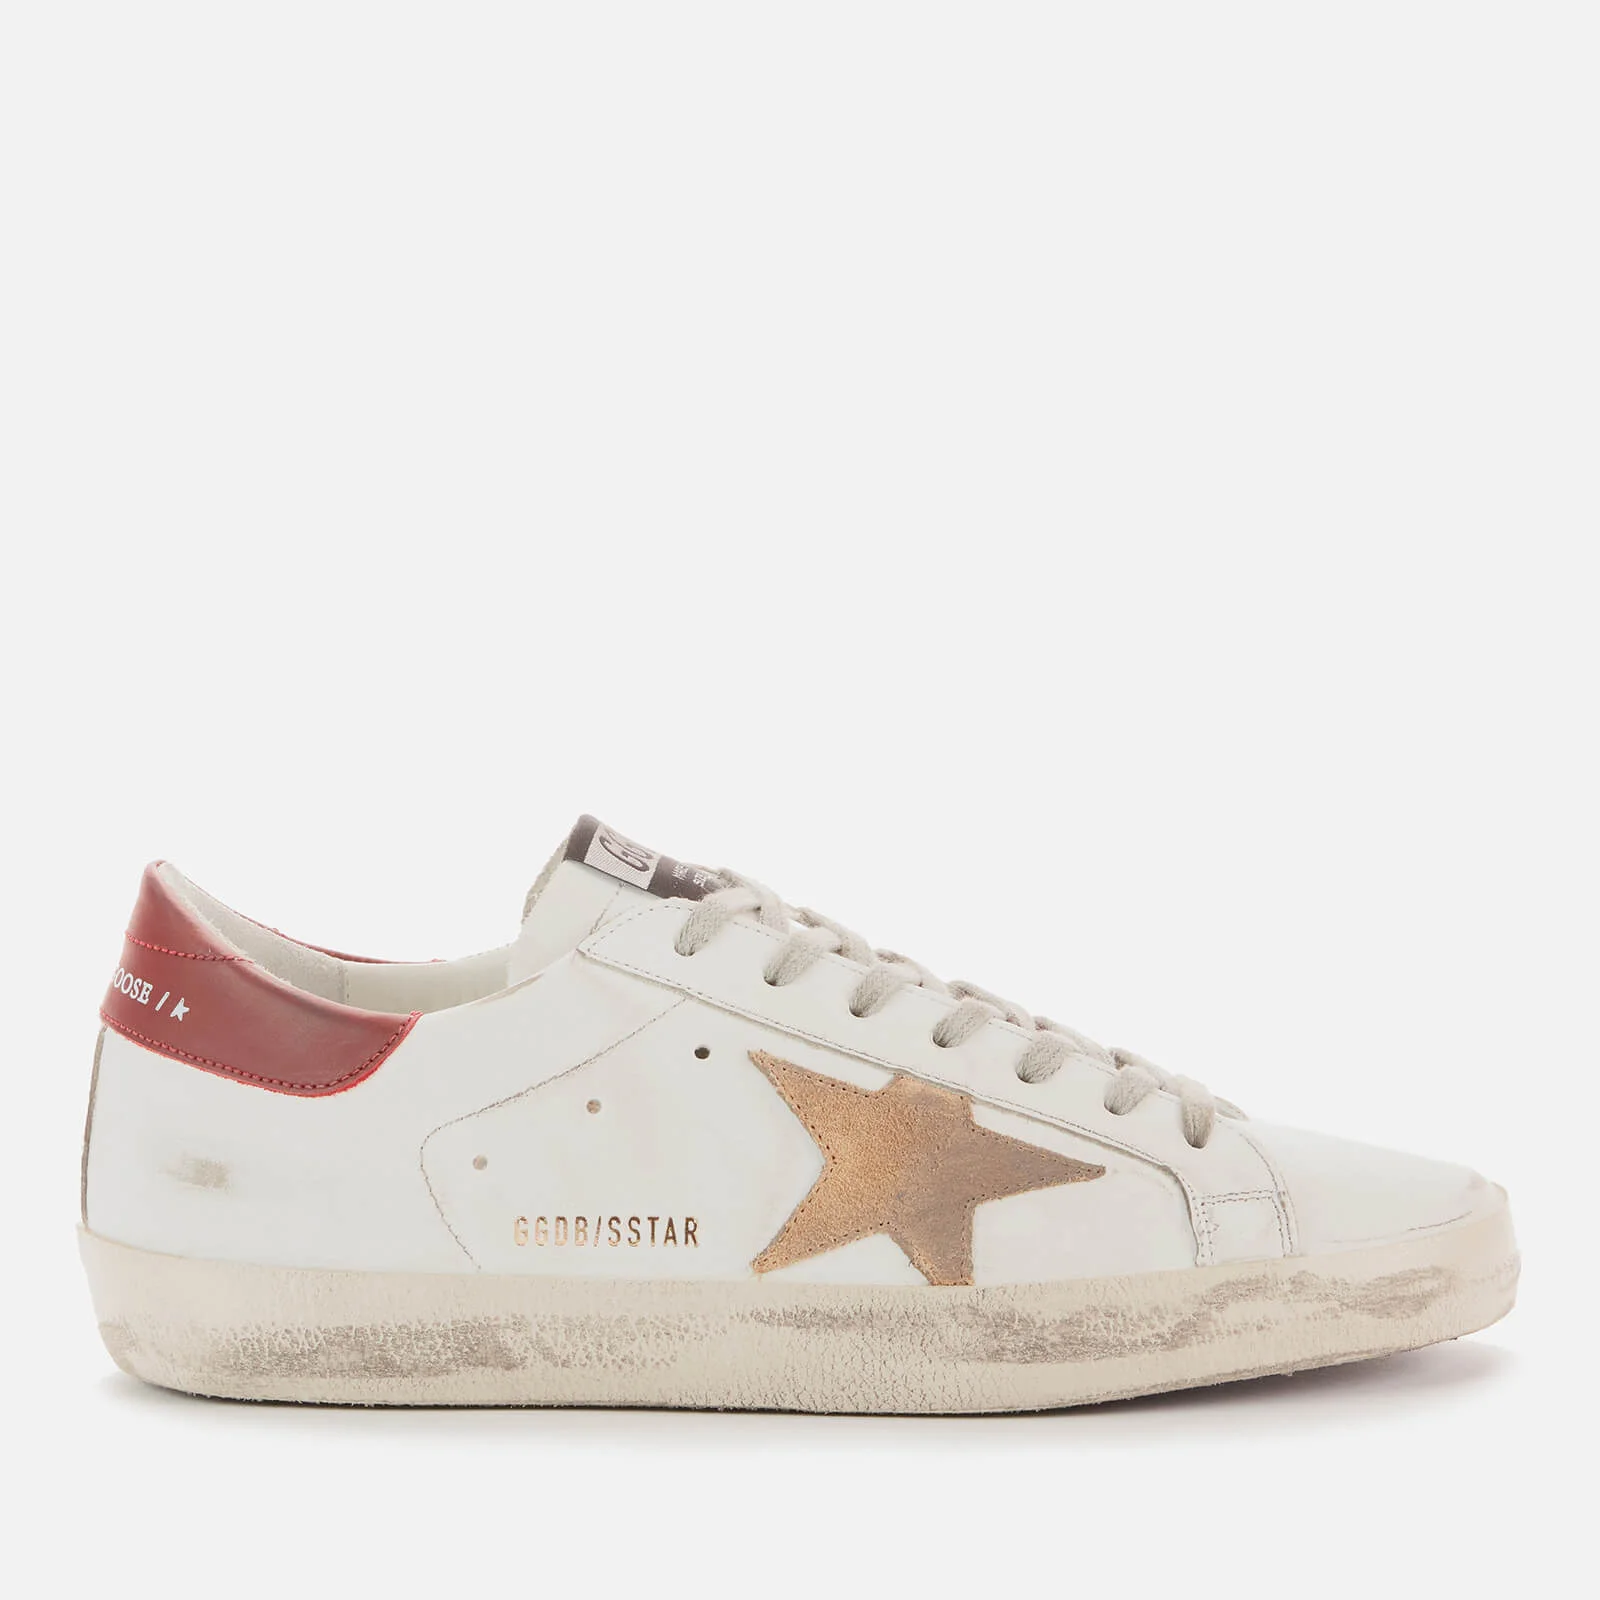 Golden Goose Men's Superstar Leather Trainers - White/Cappuccino/Bordeaux Image 1